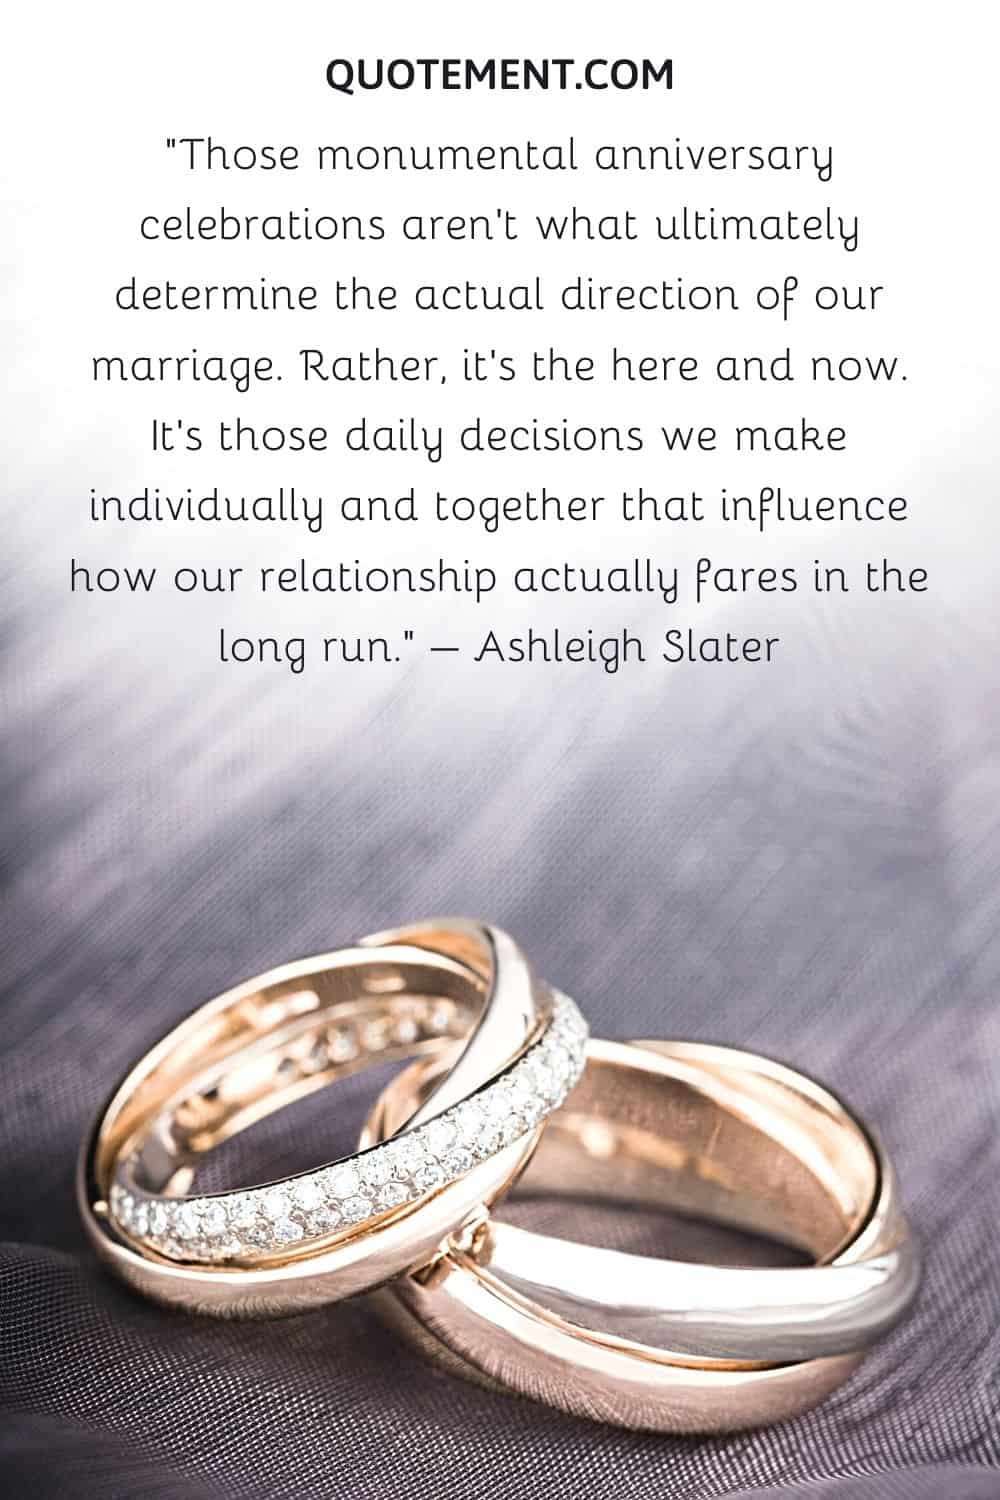 Those monumental anniversary celebrations aren't what ultimately determine the actual direction of our marriage.